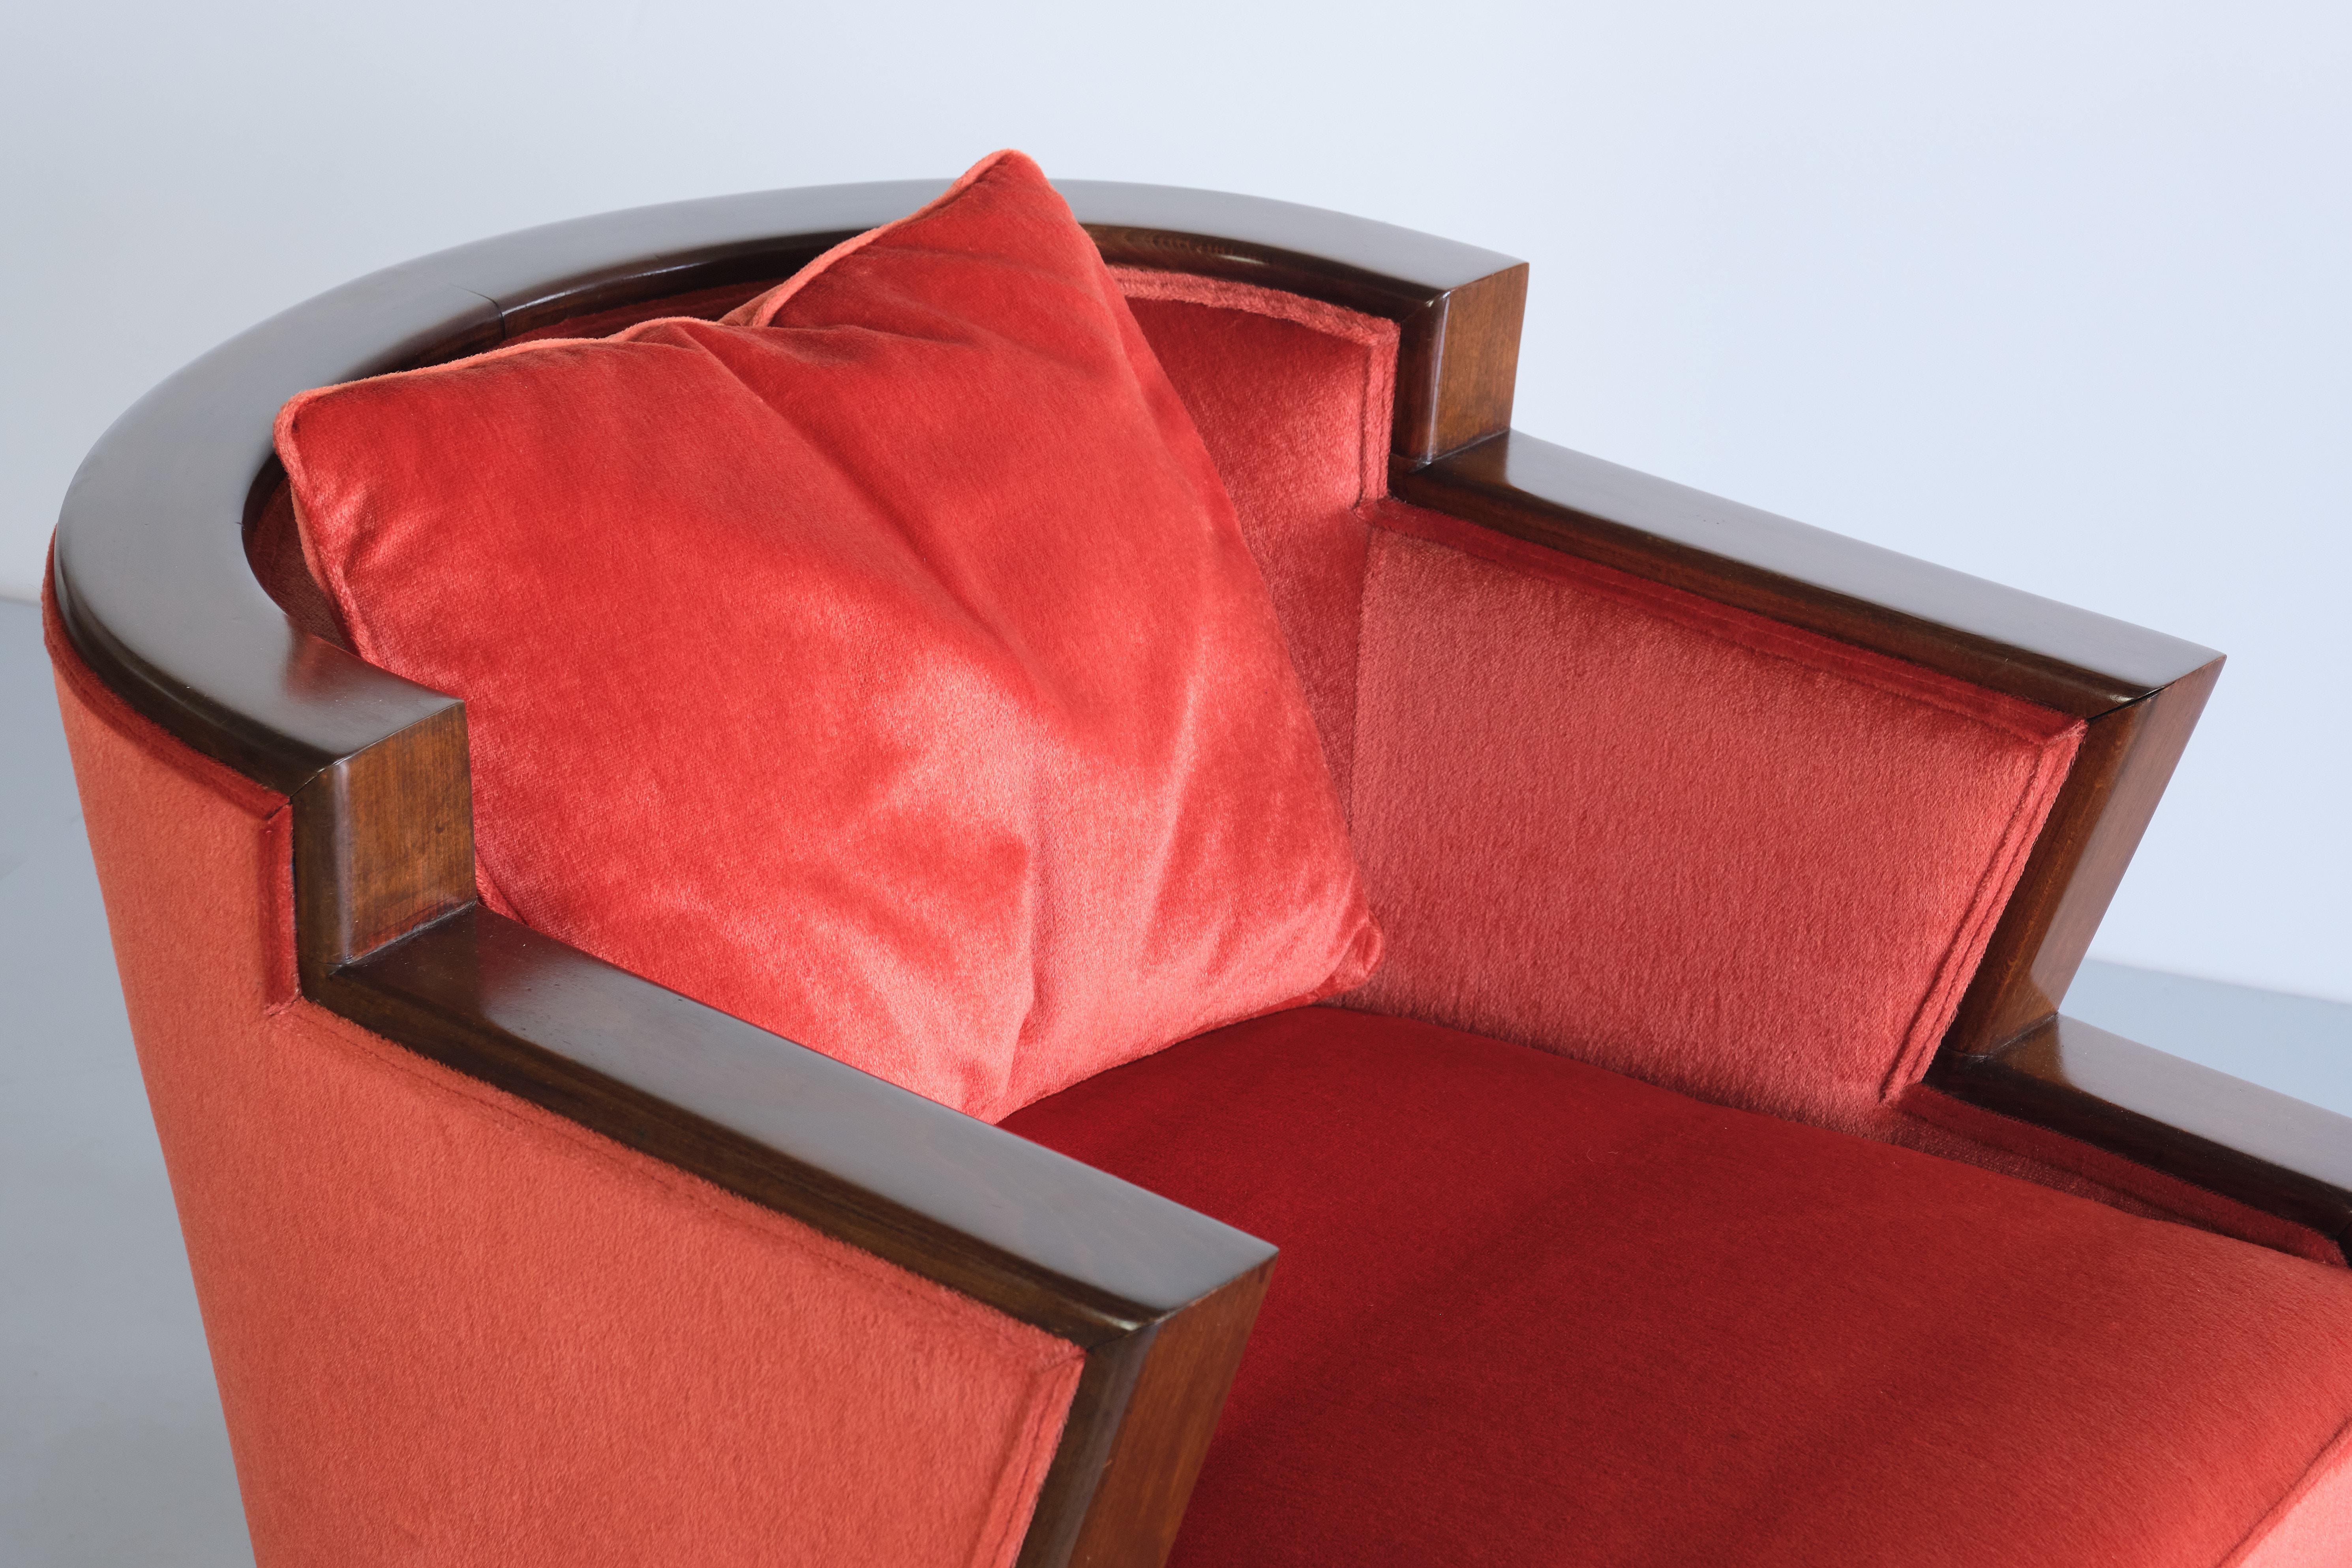 Early 20th Century Cubist Art Deco Armchair in Vermilion Mohair Velvet and Maple, Belgium, 1920s For Sale